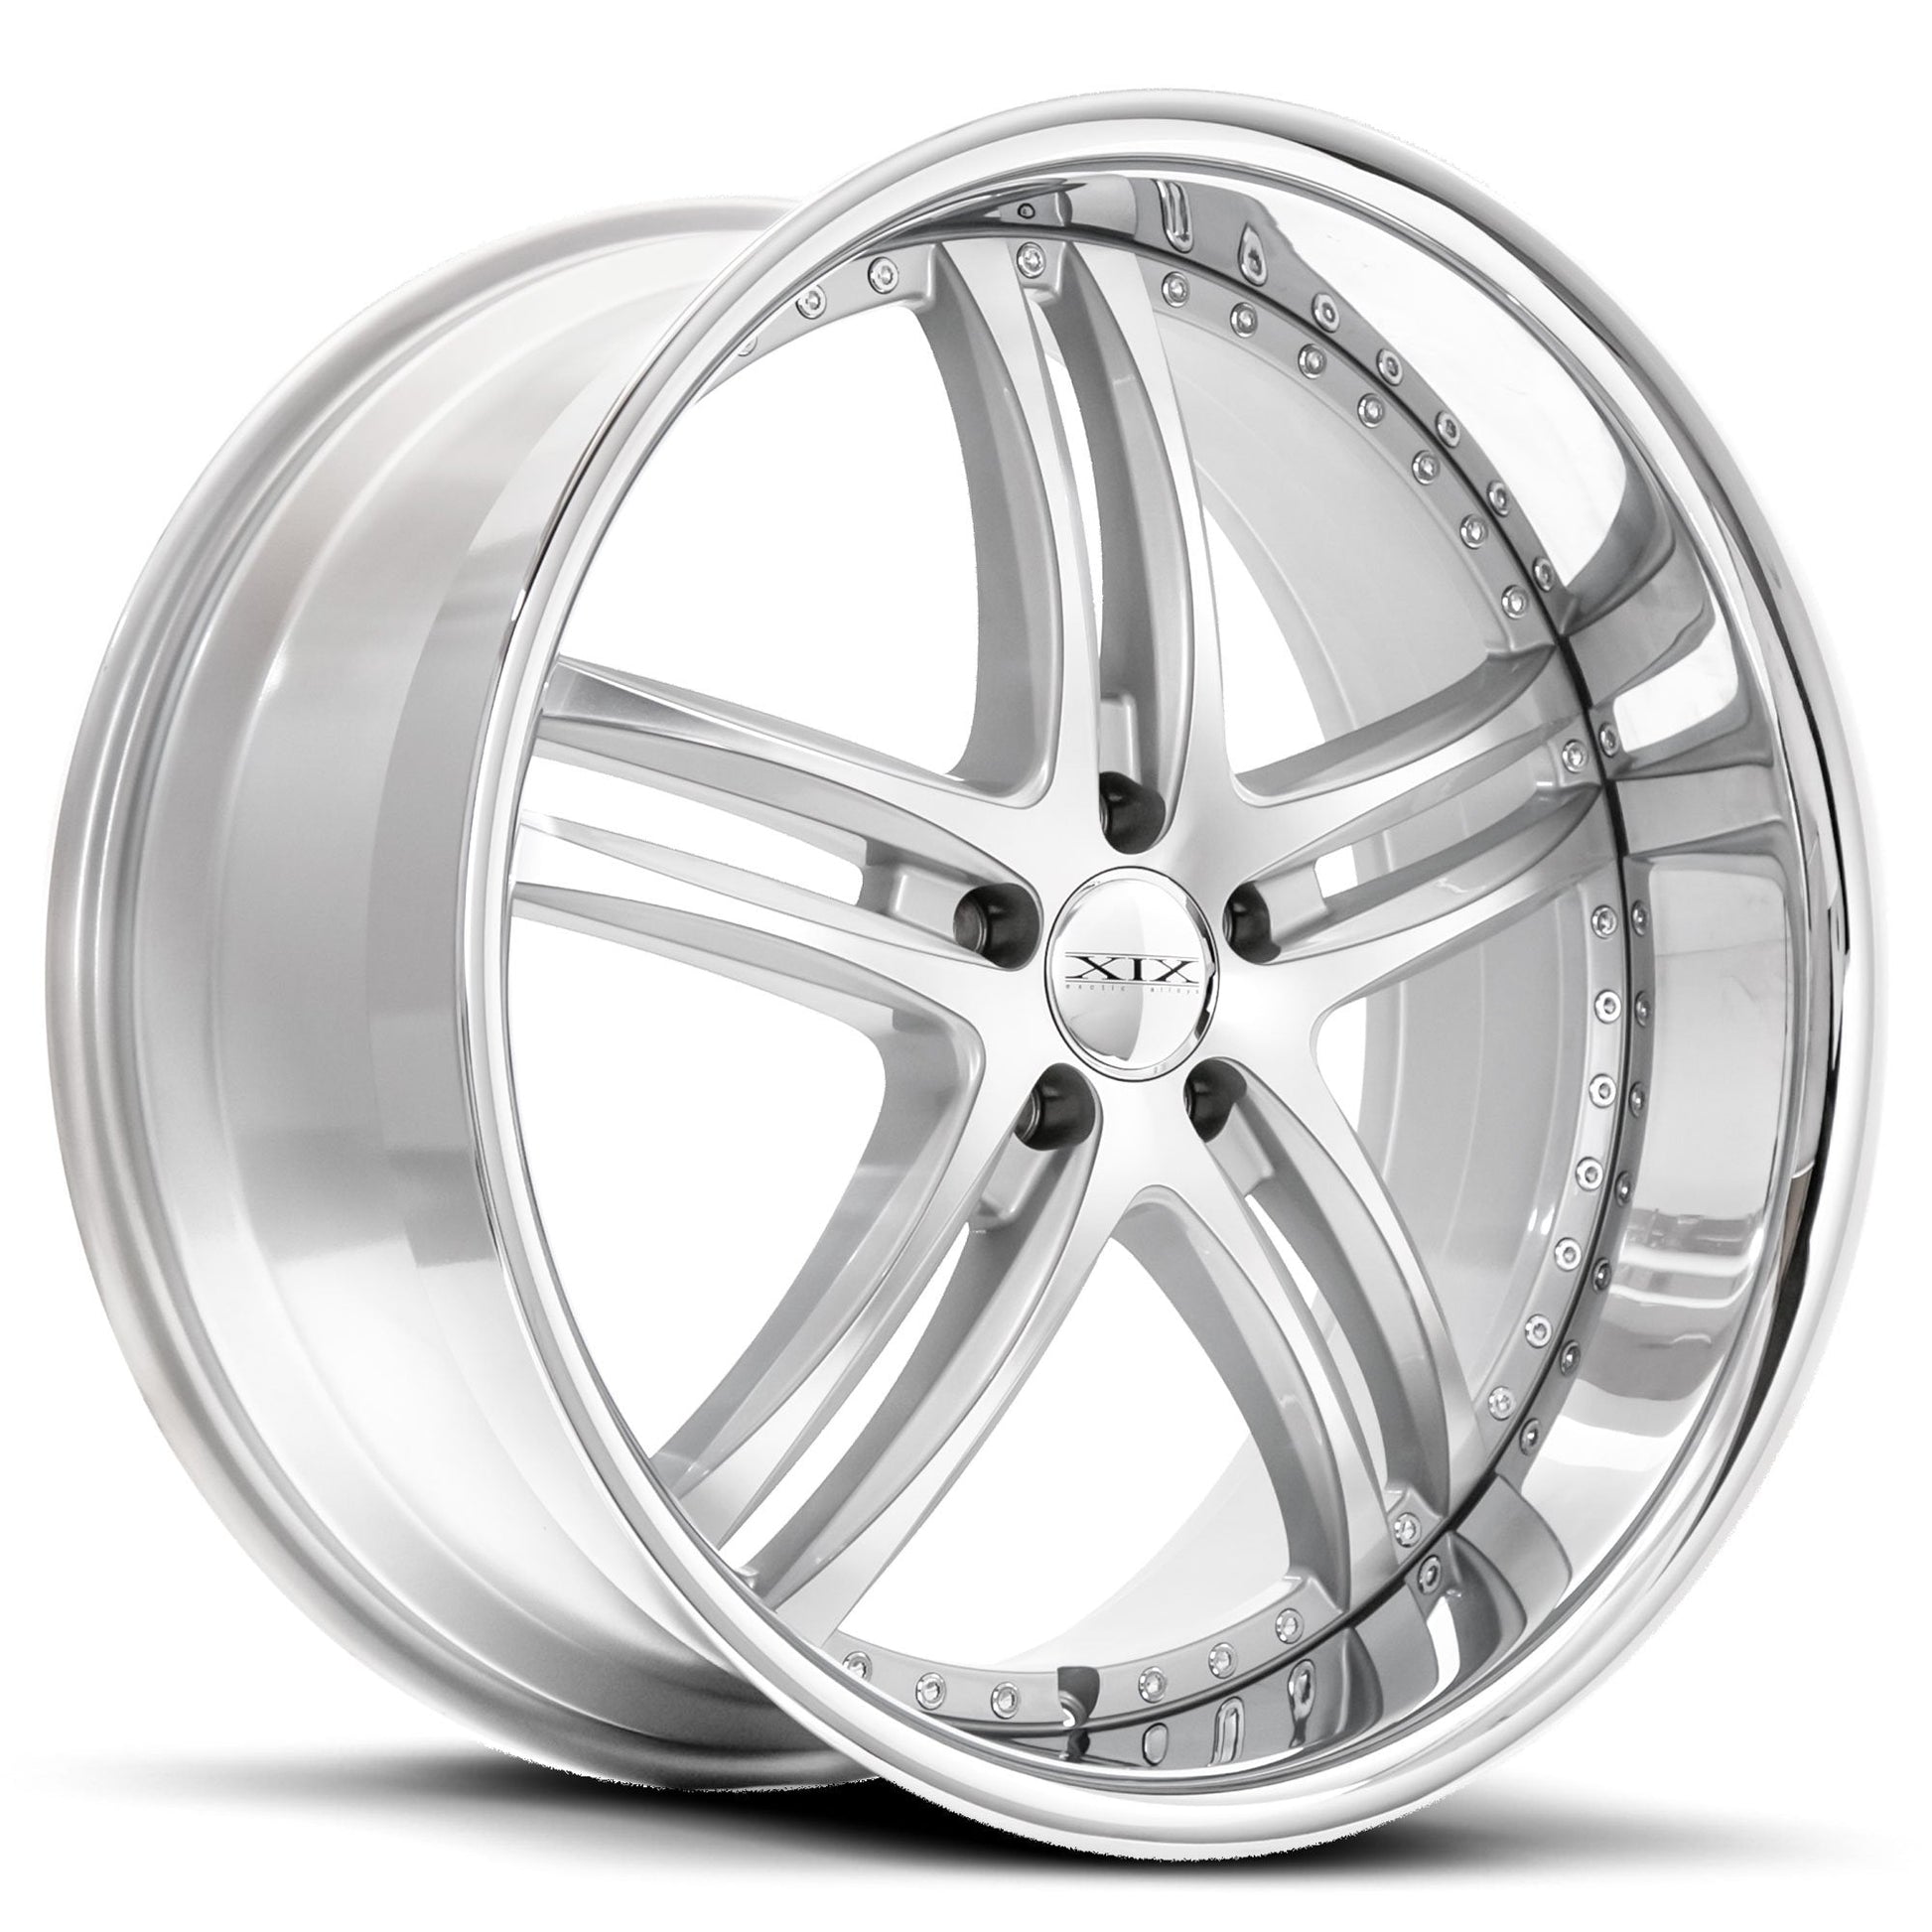 XIX-X15-Silver-Machined-with-Stainless-Steel-Lip-Silver-22x9-78.1-wheels-rims-felger-Felghuset